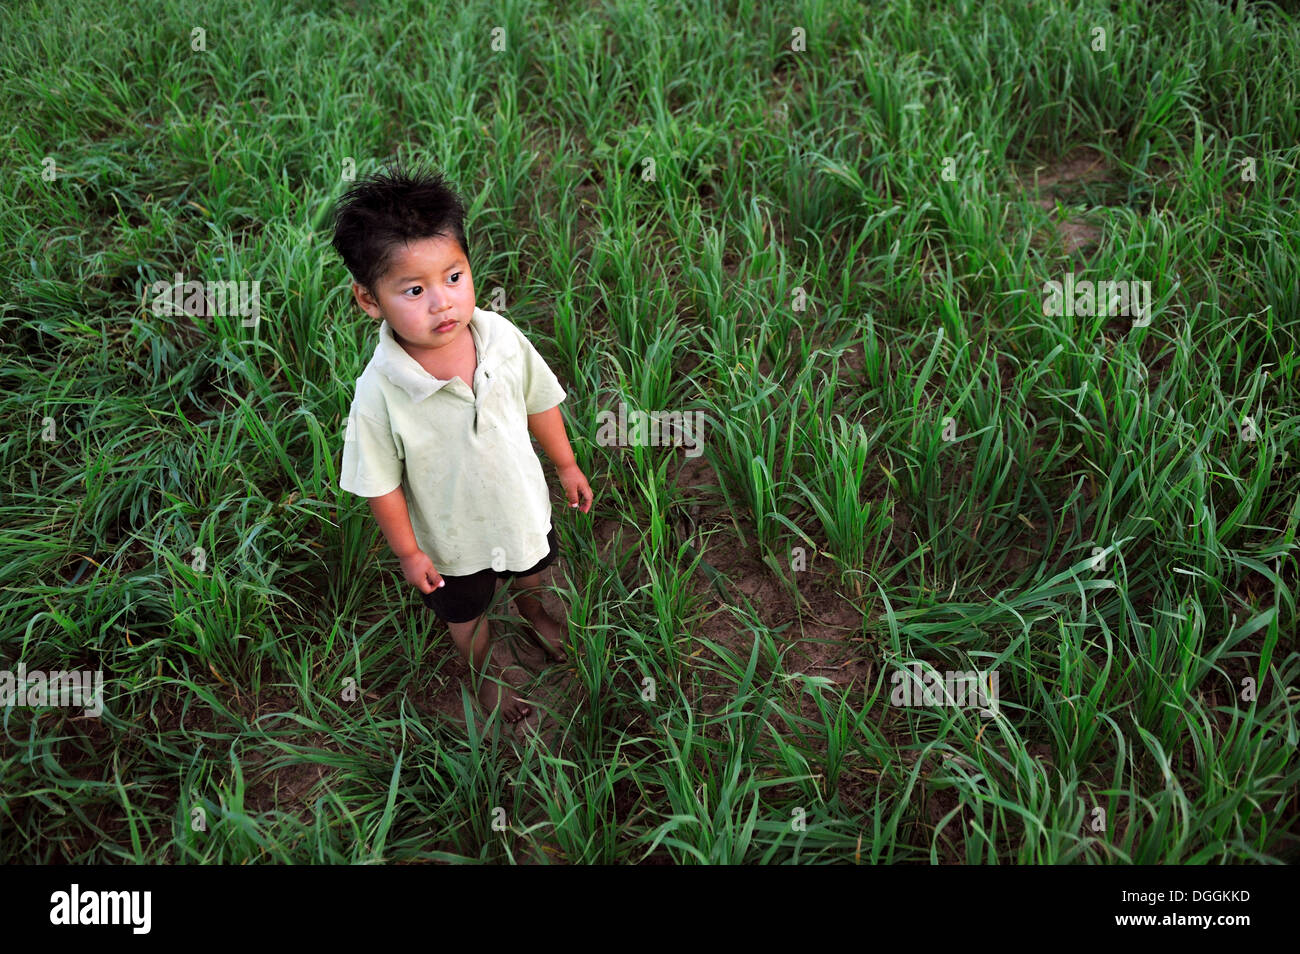 Boy, 2, standing in a field of oats, in a community of Guarani Indians, Jaguary, Caaguazú Department, Paraguay Stock Photo